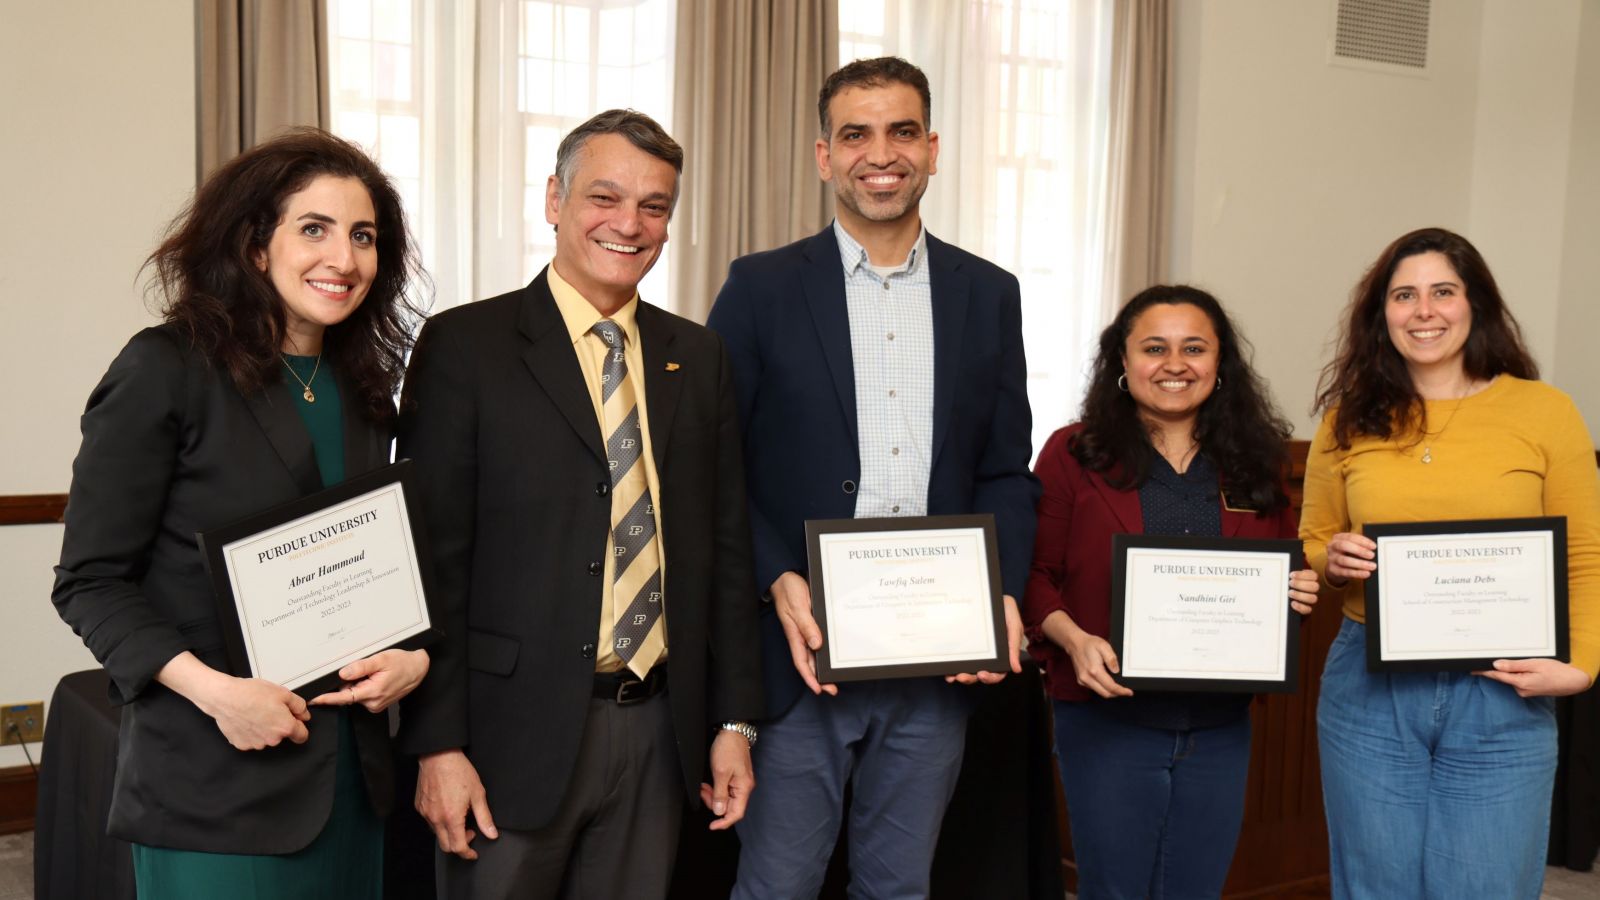 The certificate holders for Outstanding Faculty in Learning (Abrar Hammoud, Tawfiq Salem, Nandhini Giri and Luciana Debs) are pictured alongside Polytechnic Dean Daniel Castro-Lacouture. (Purdue University photo/John O'Malley)